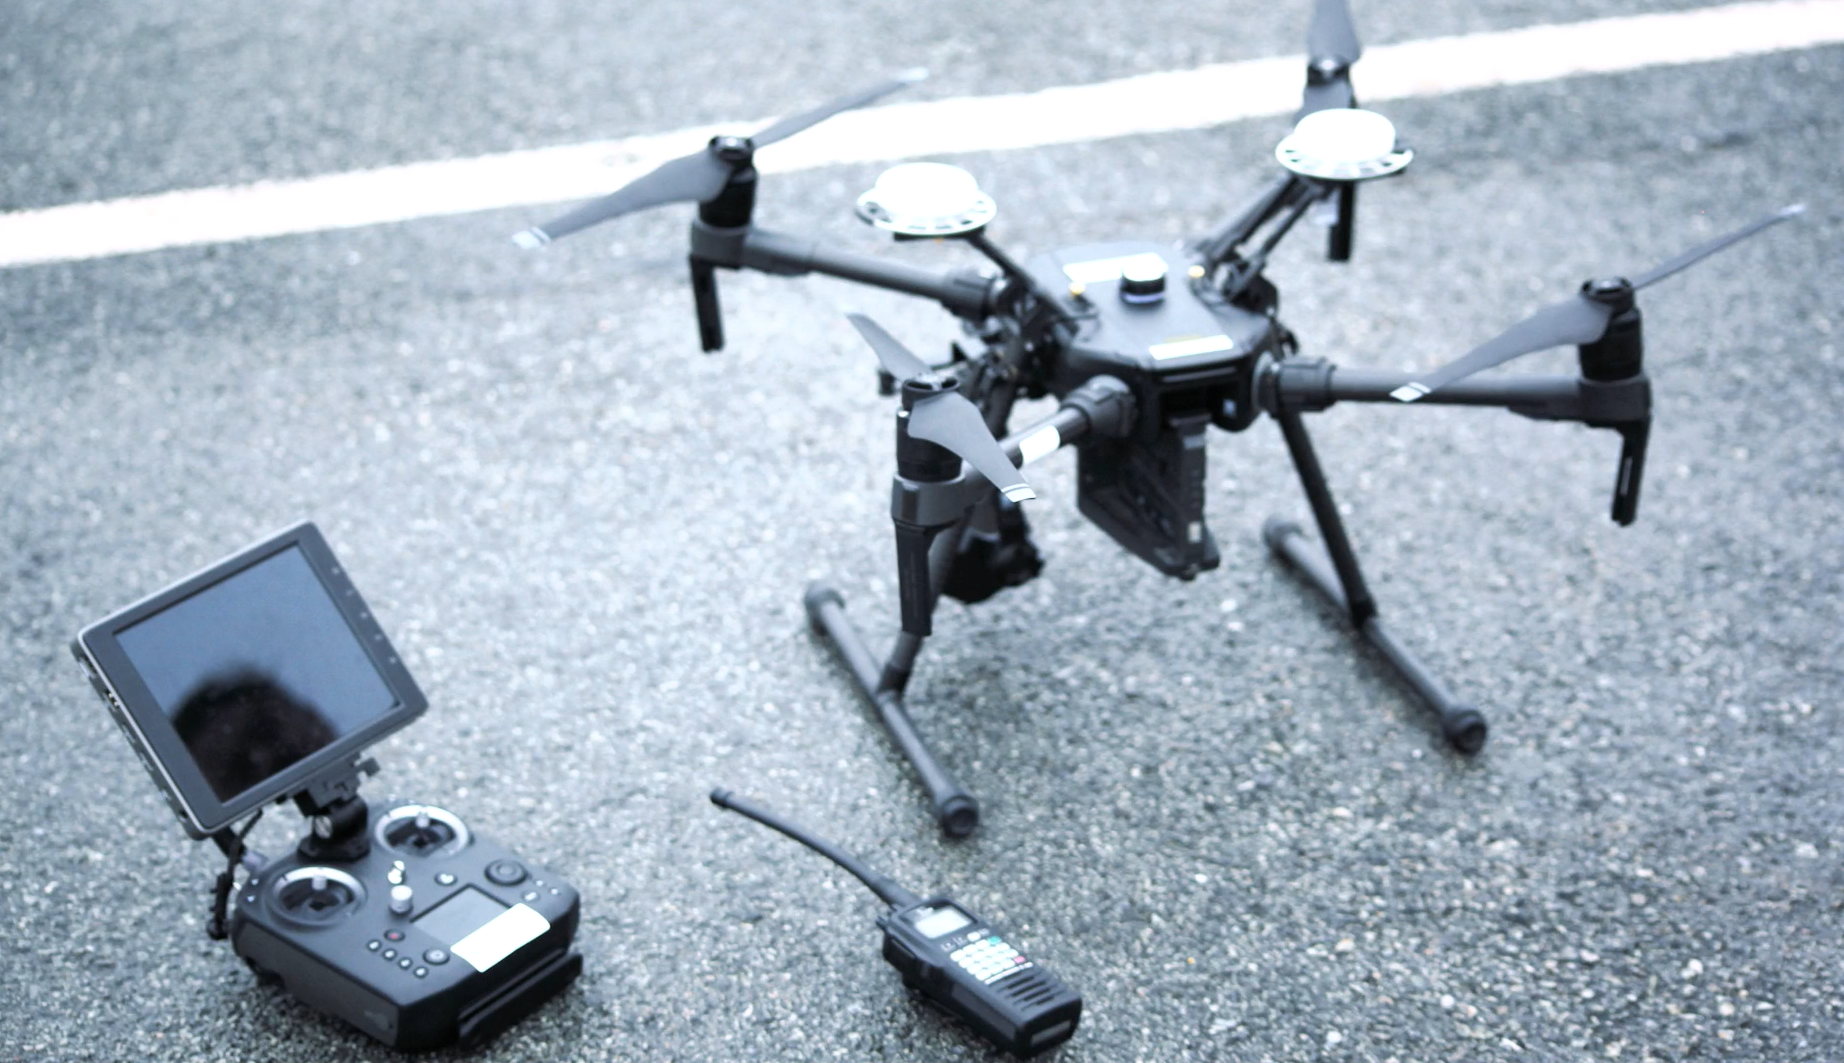 Drones monitor the airport – developing autonomous sensor systems